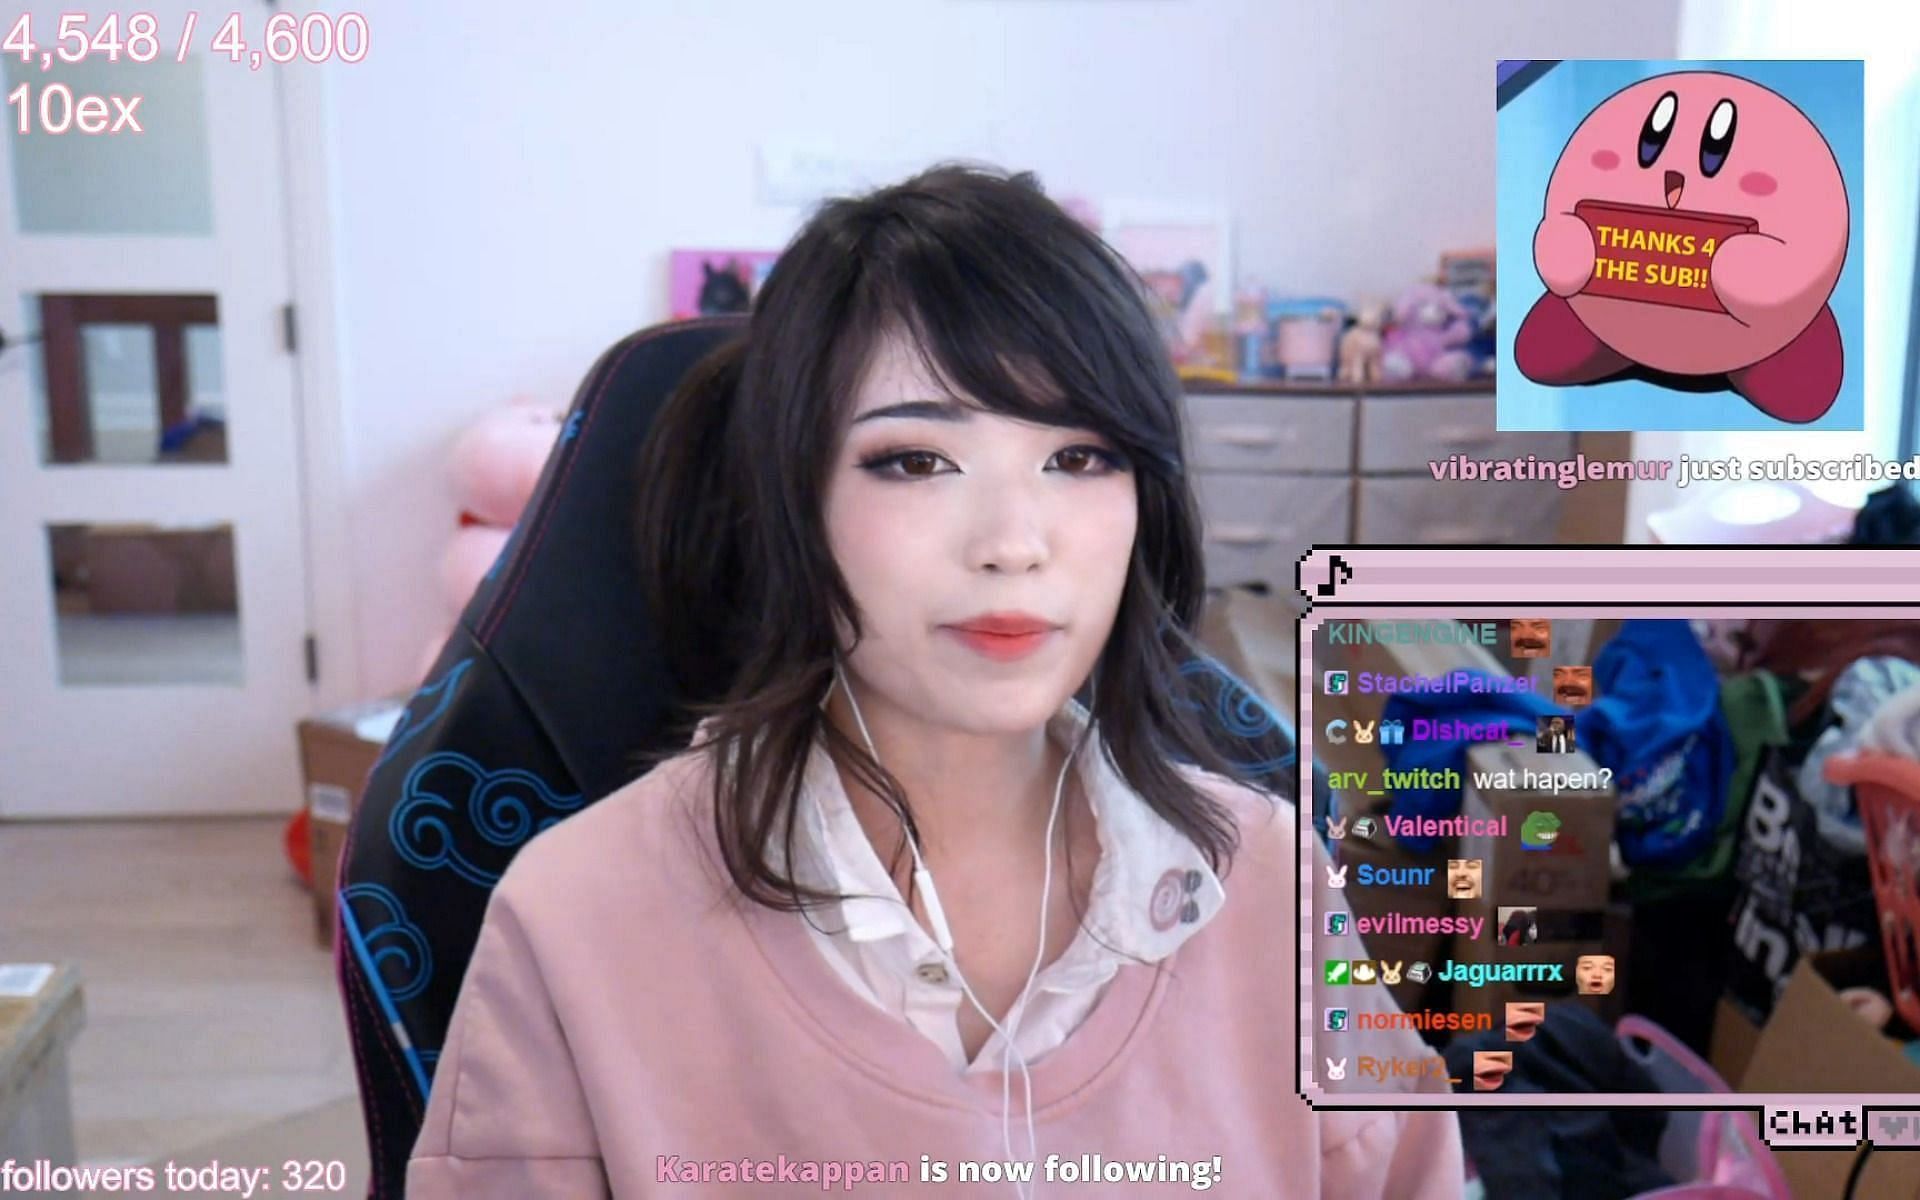 Valkyrae apologizes to QTCinderella after Streamer Awards